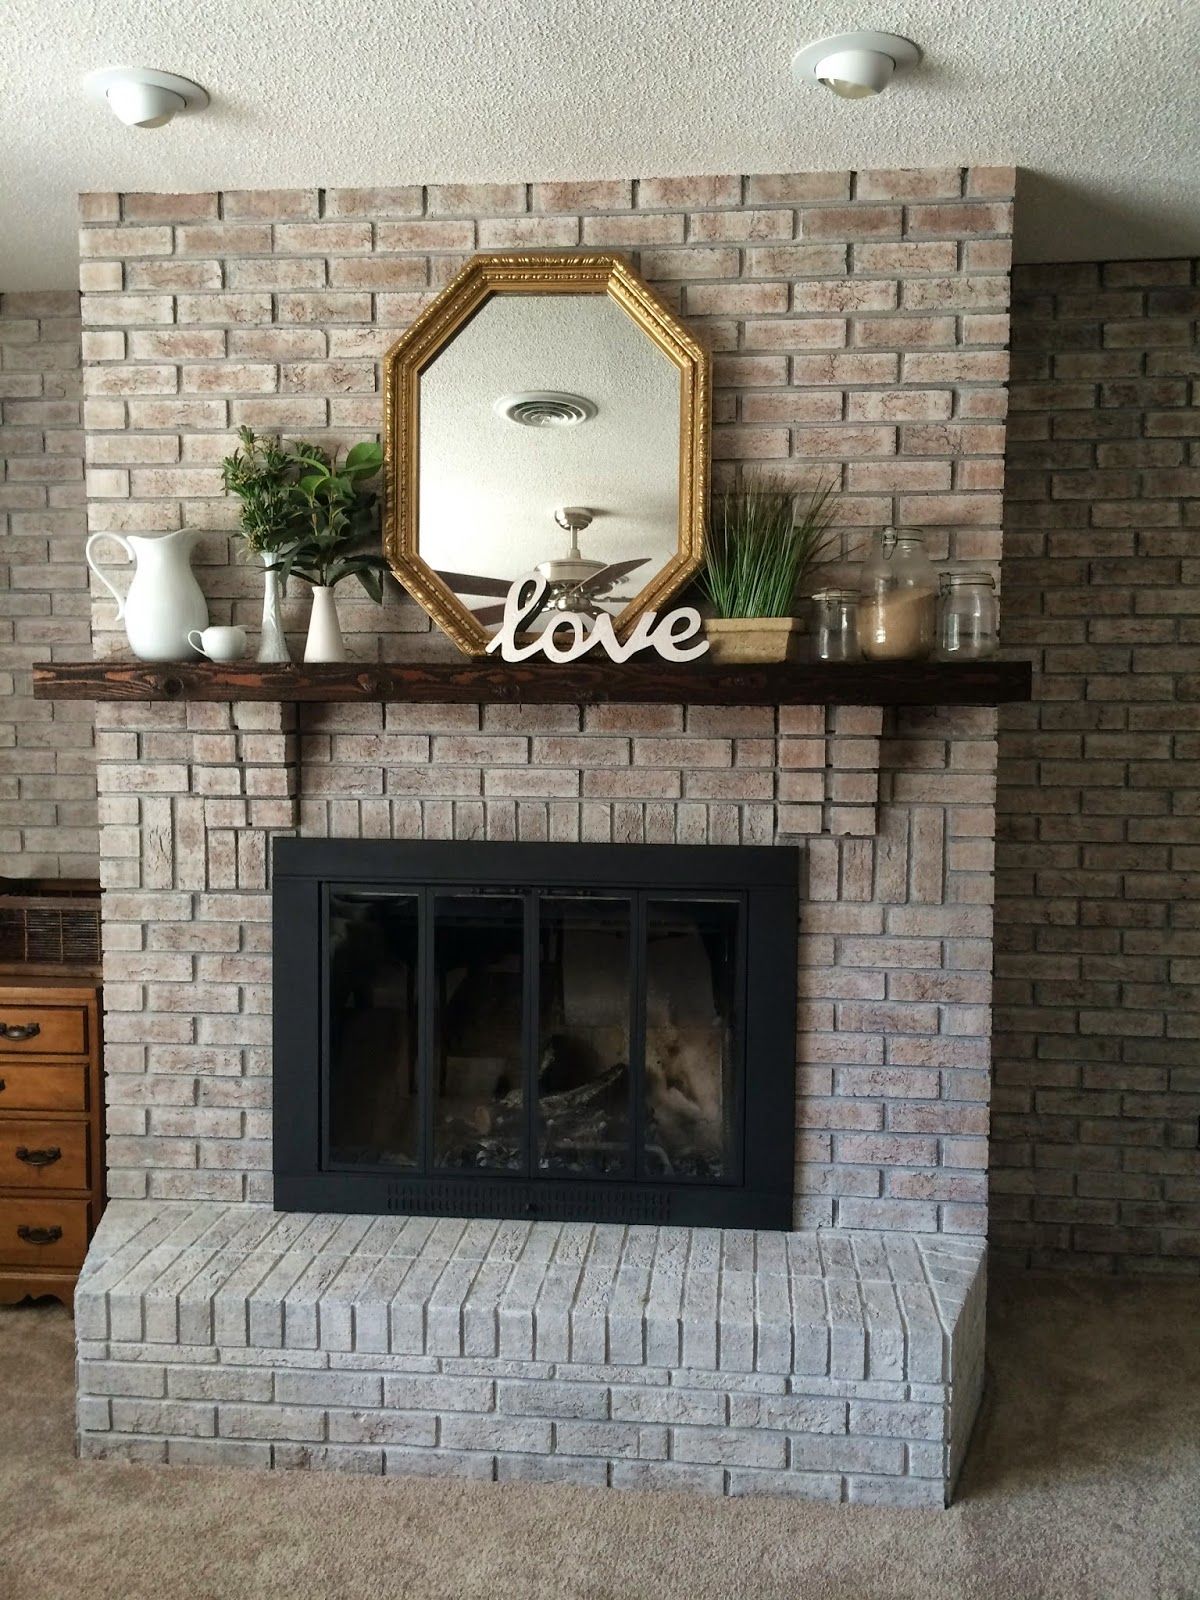 Metal Fireplace Paint Best Of White Washing Brick with Gray Beige Walking with Dancers